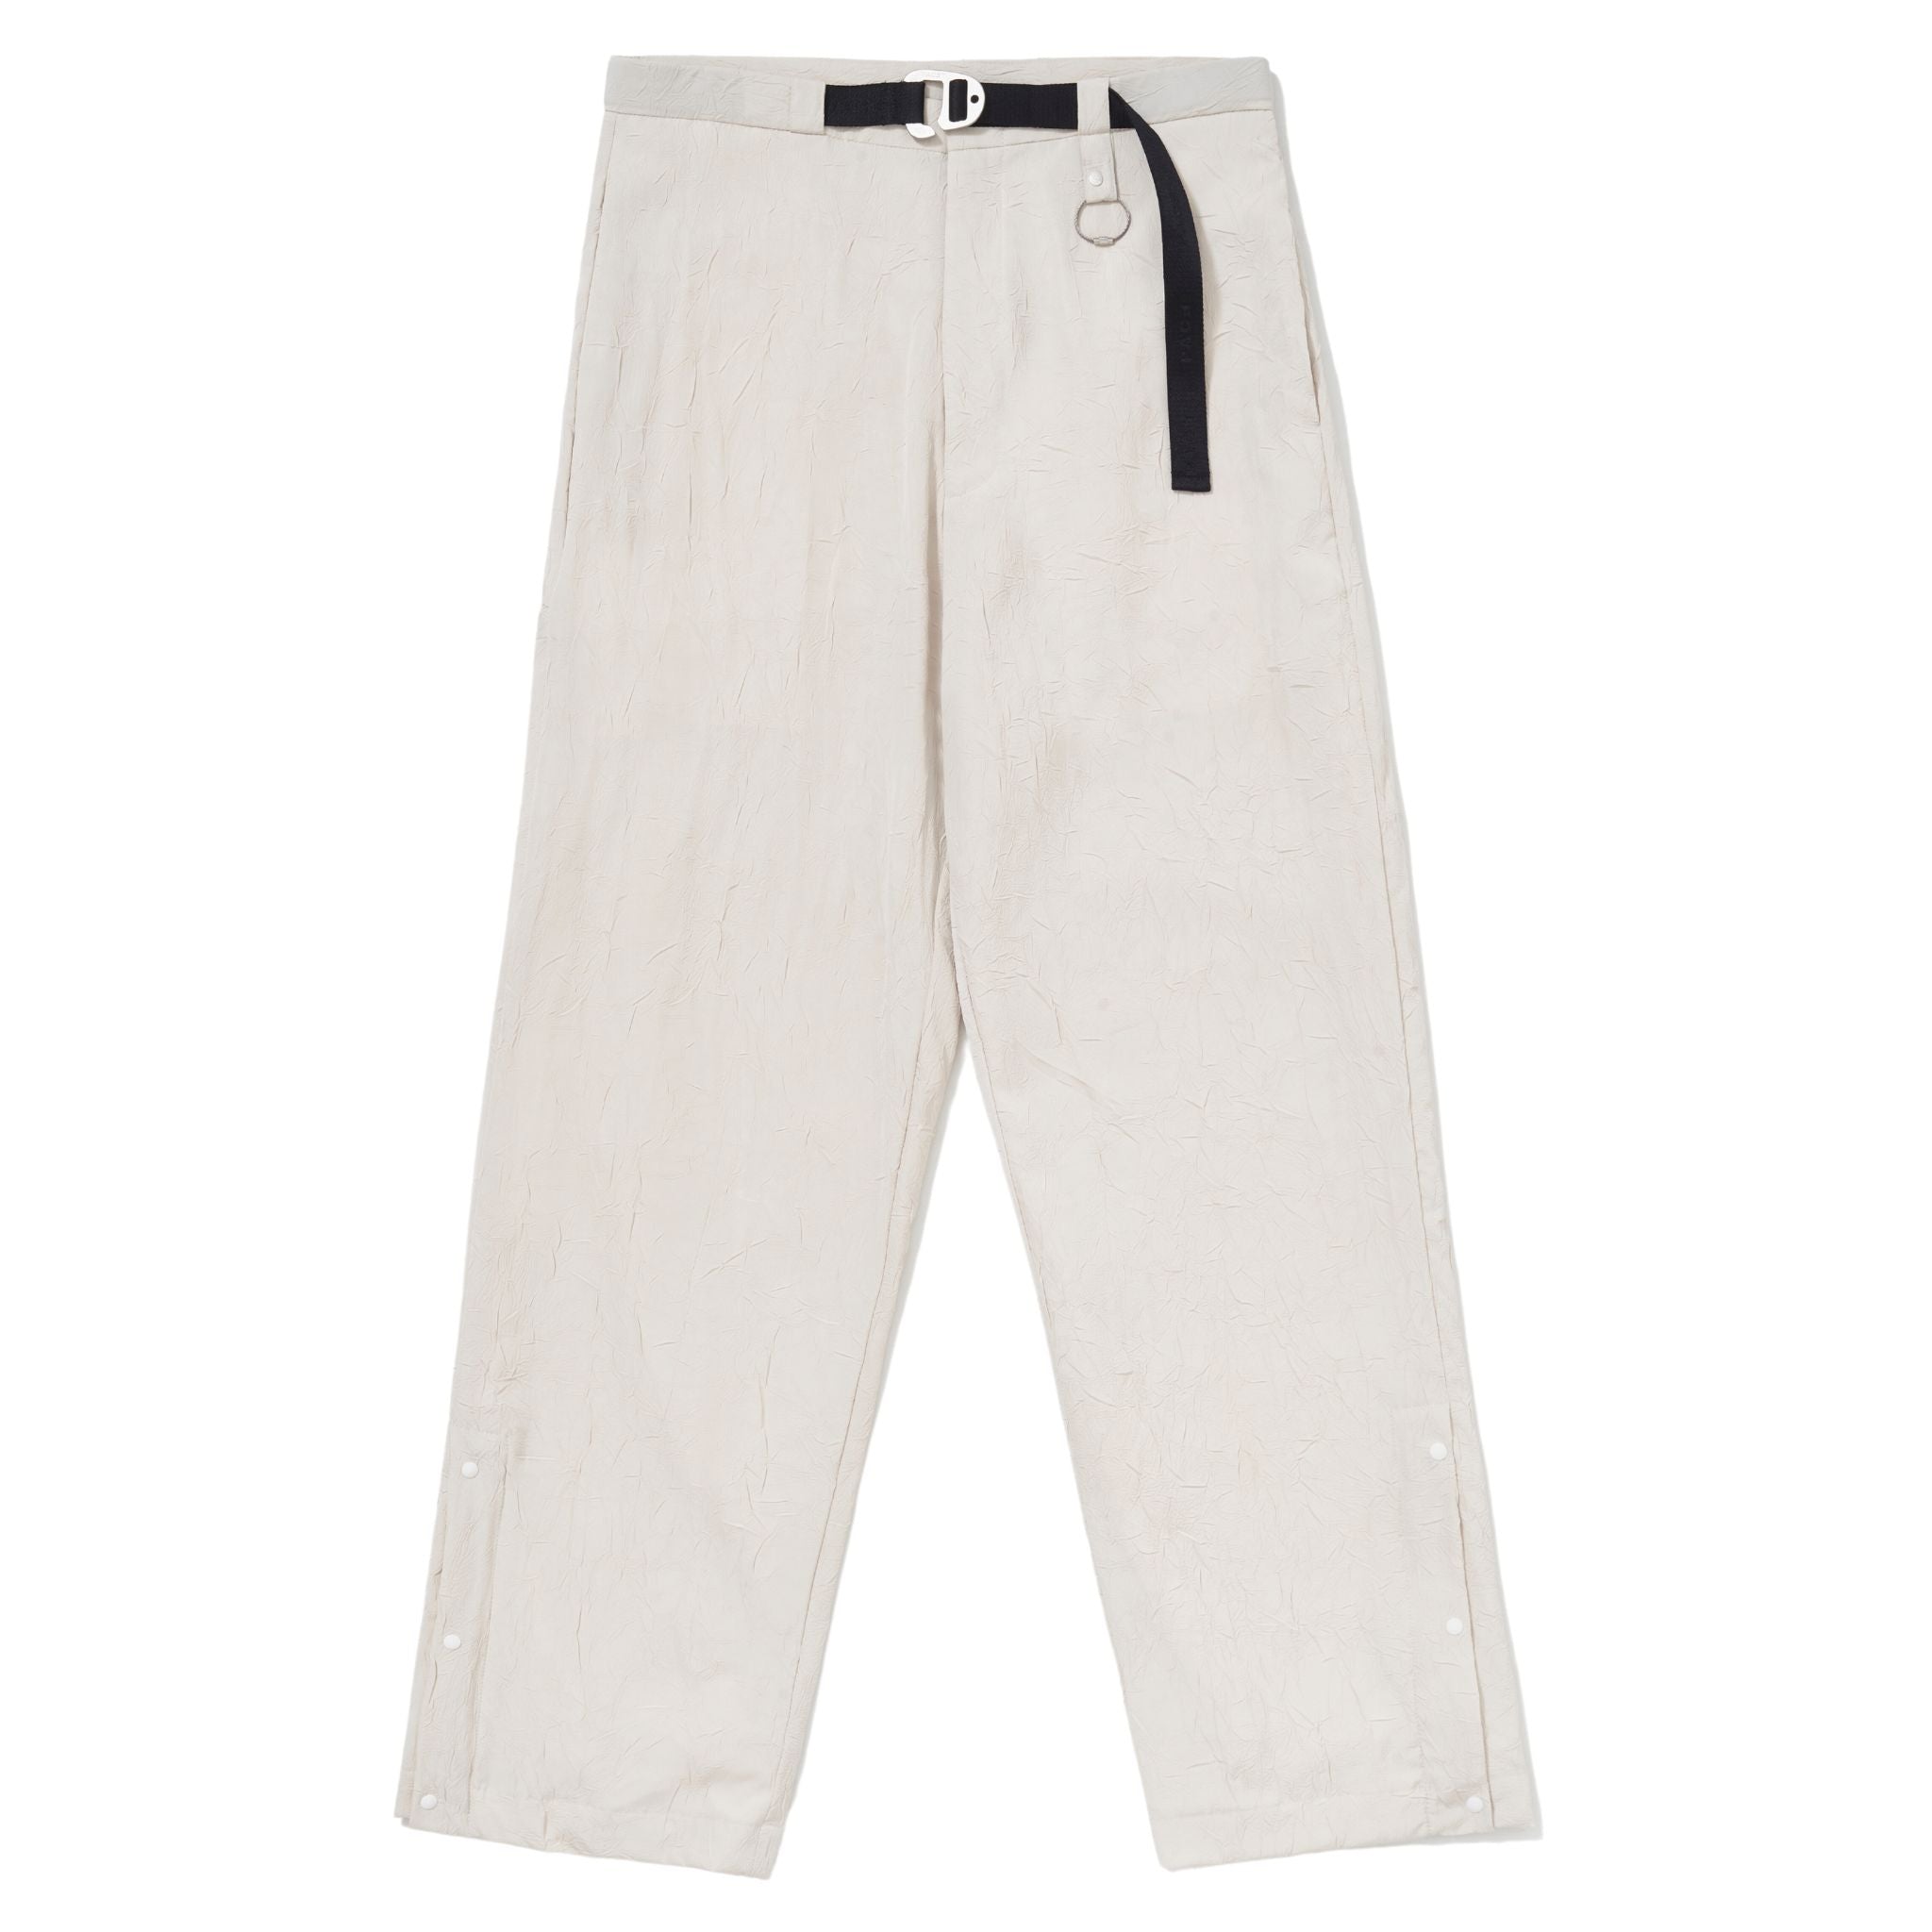 PACE - Shiwa Trousers "Off White" - THE GAME